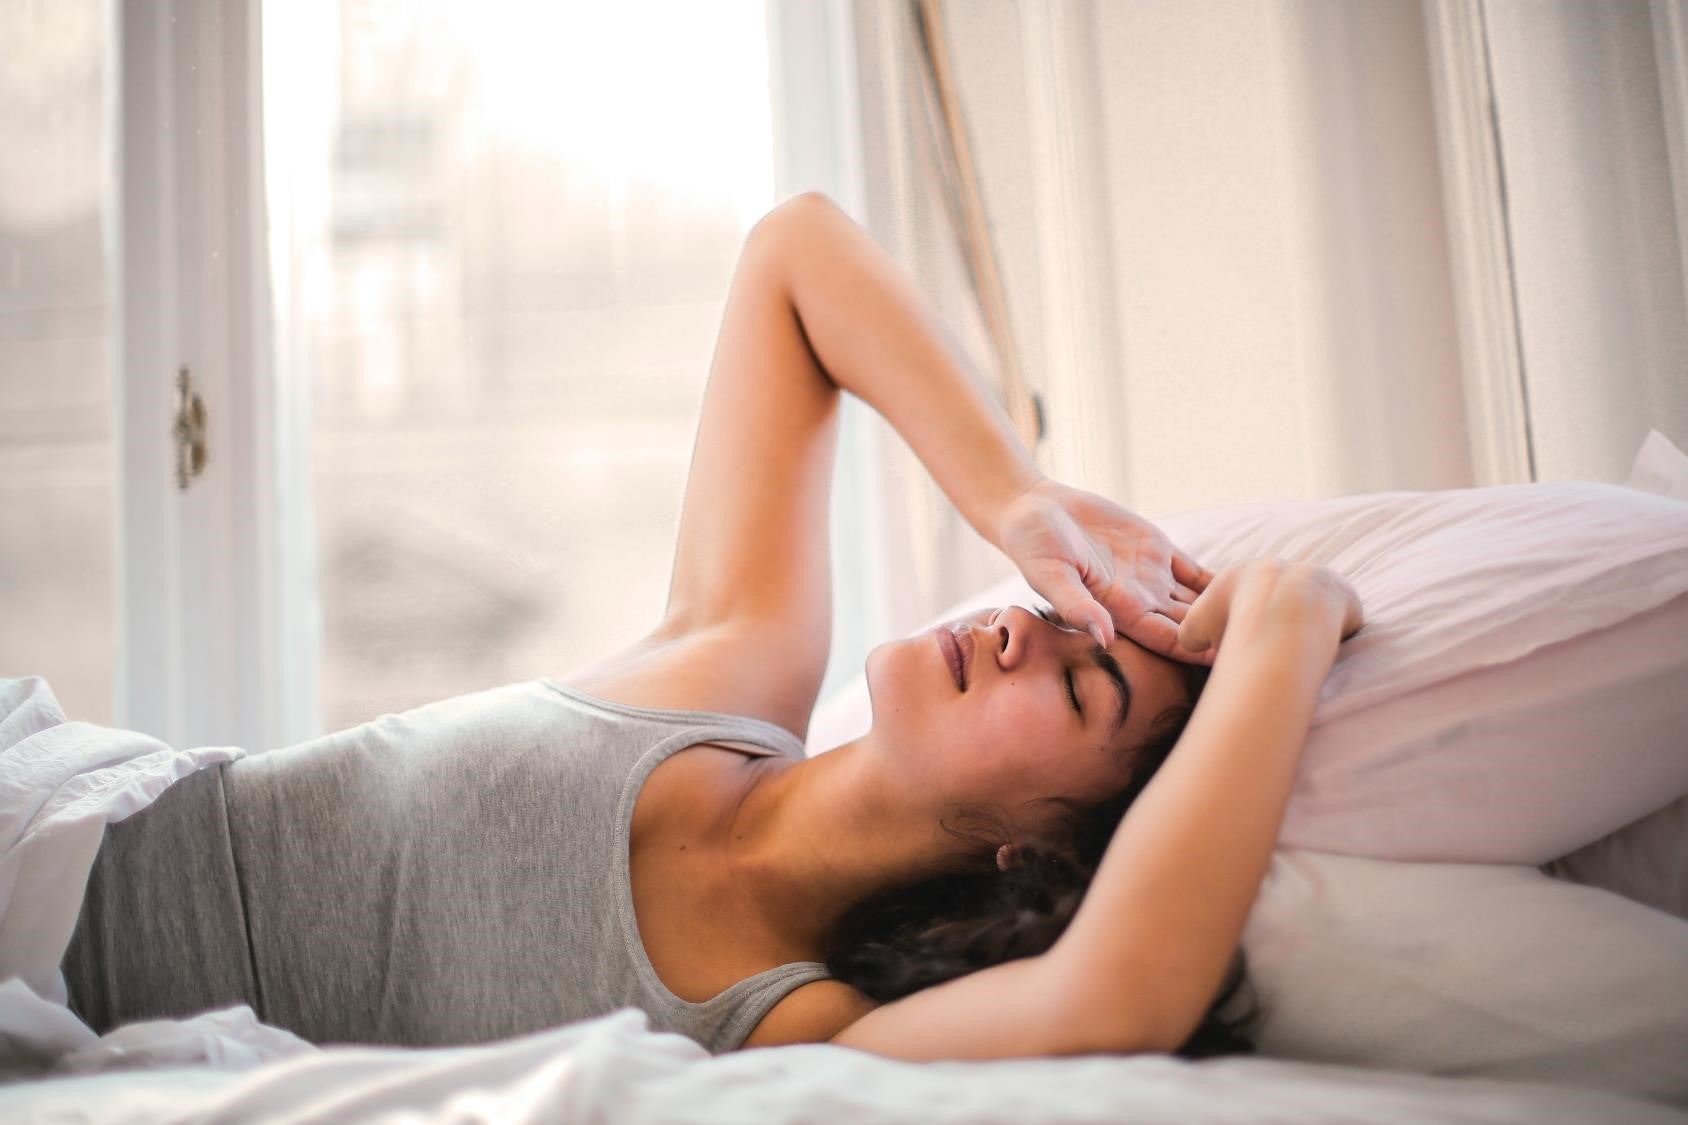 The A to ZZZ of sleep! Improve your sleep quality as per your Ayurveda body type